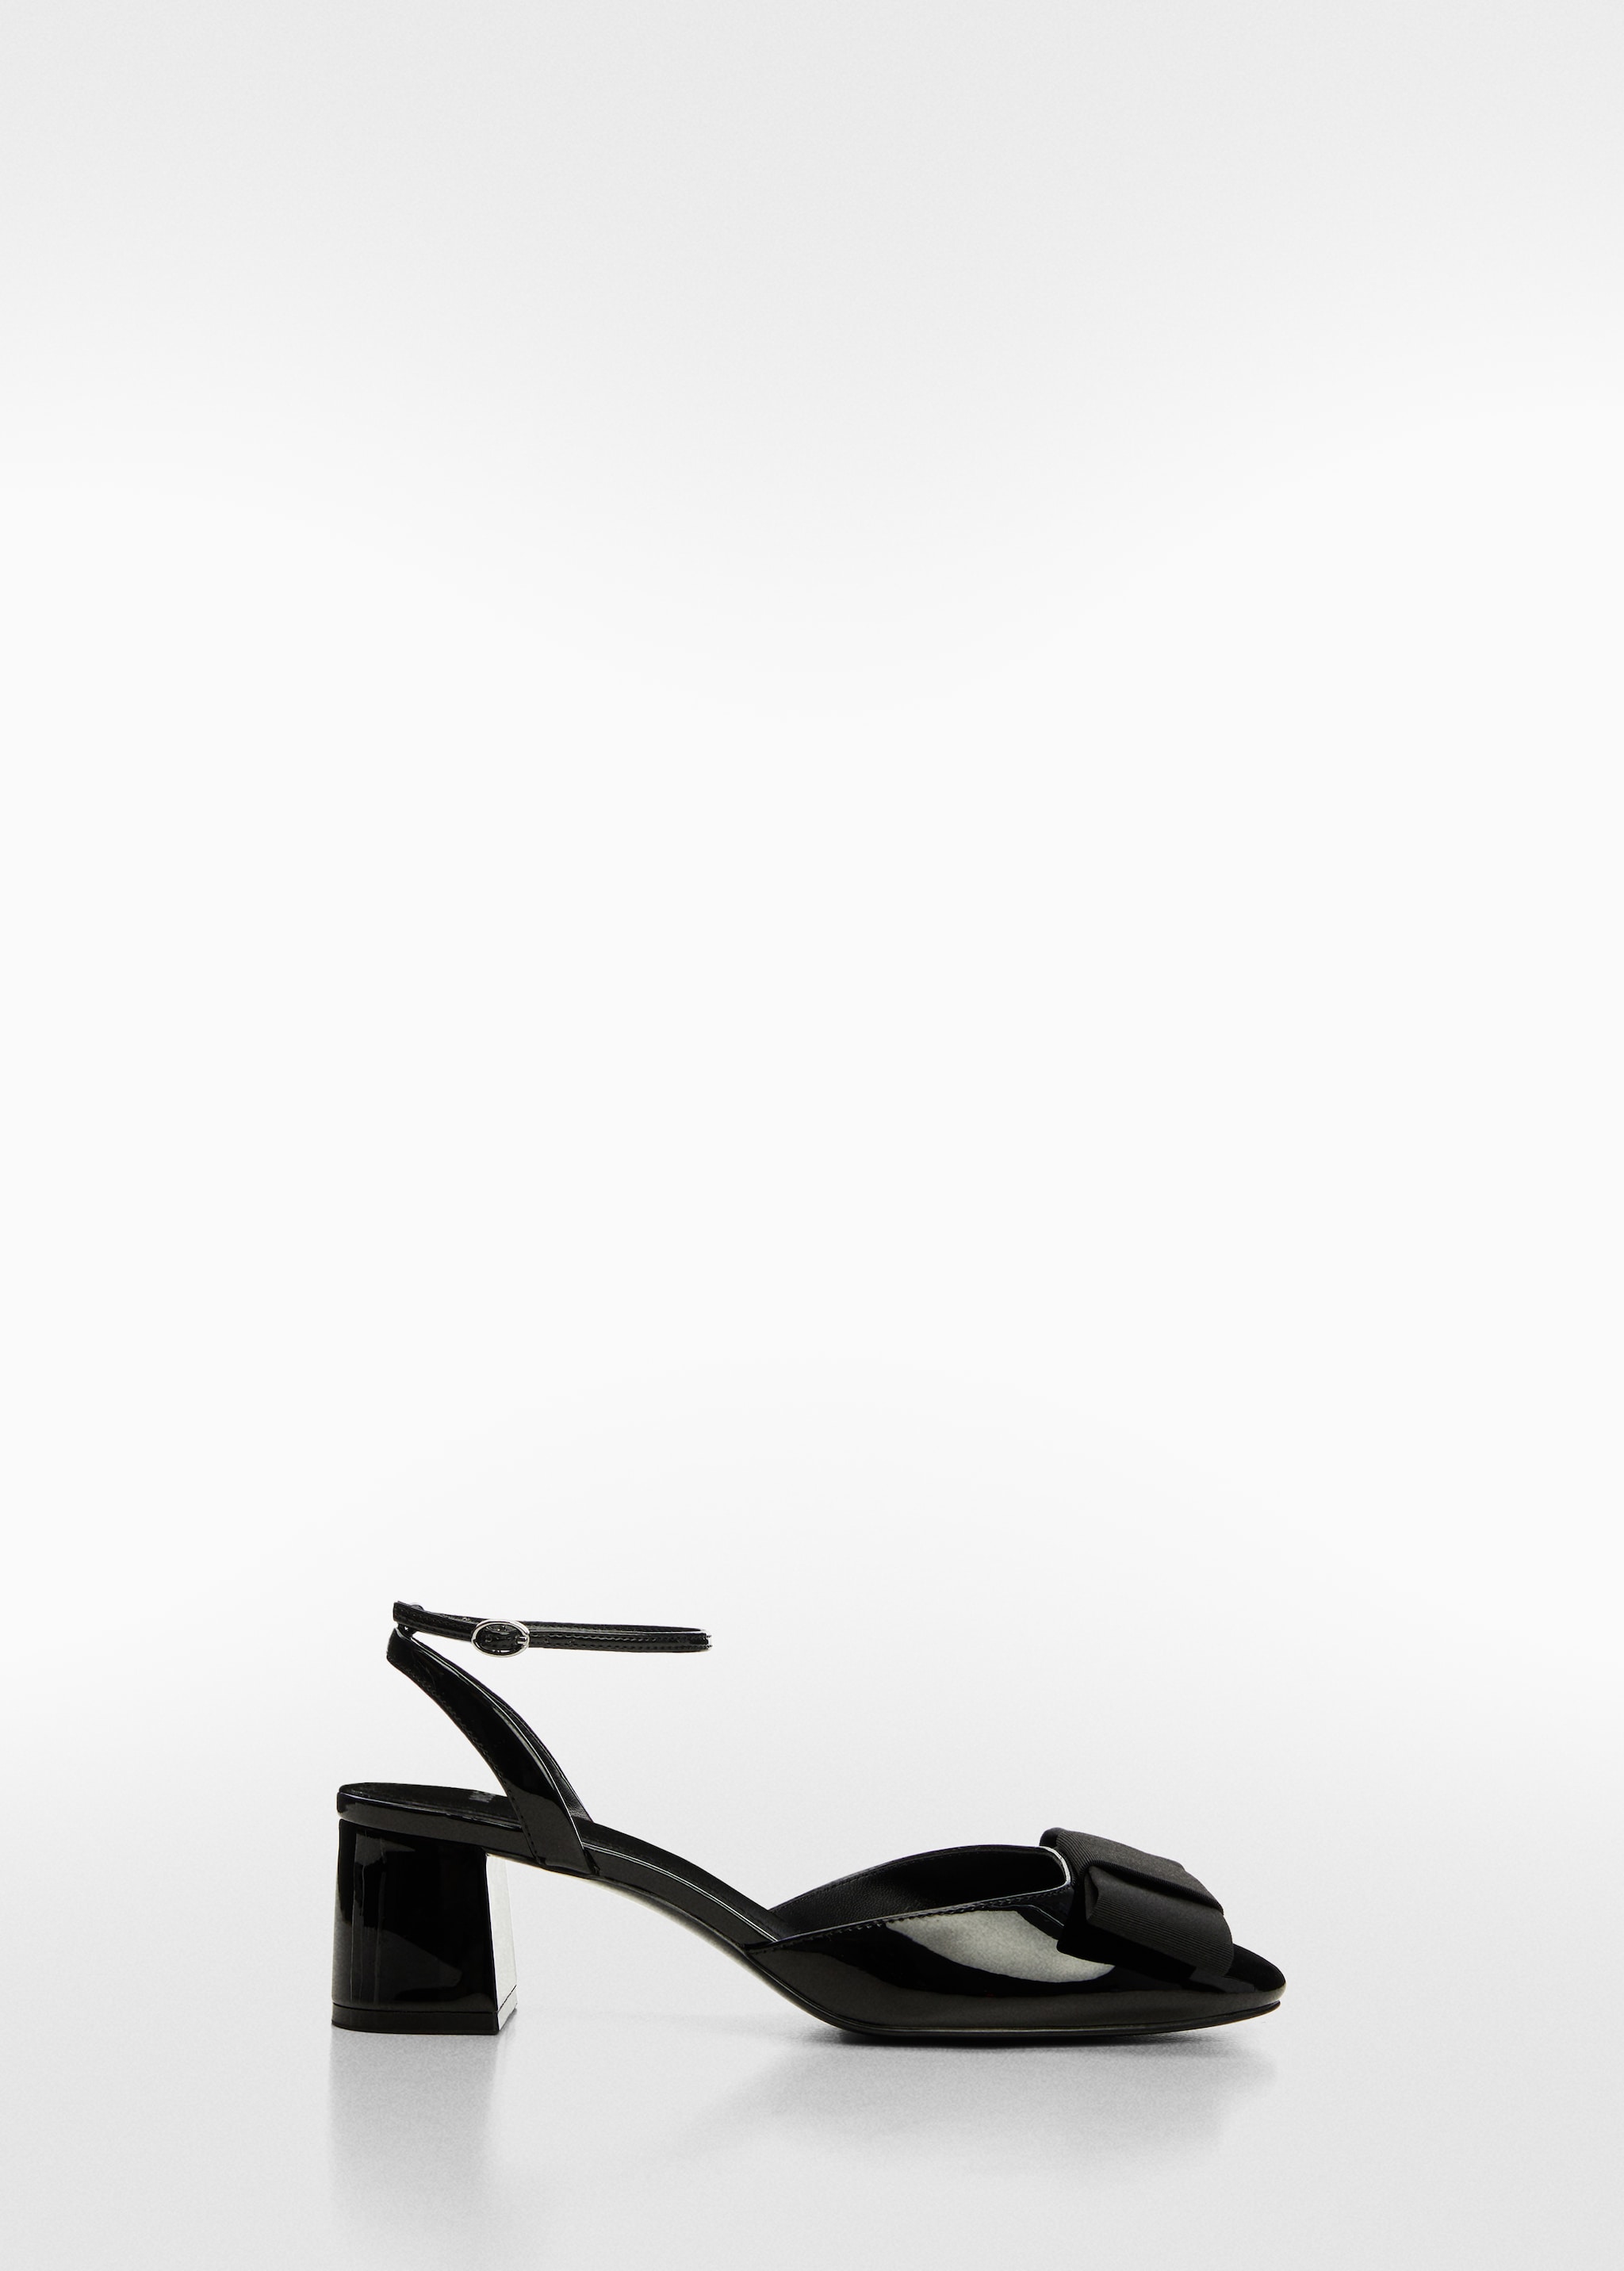 Patent leather bow shoe - Article without model